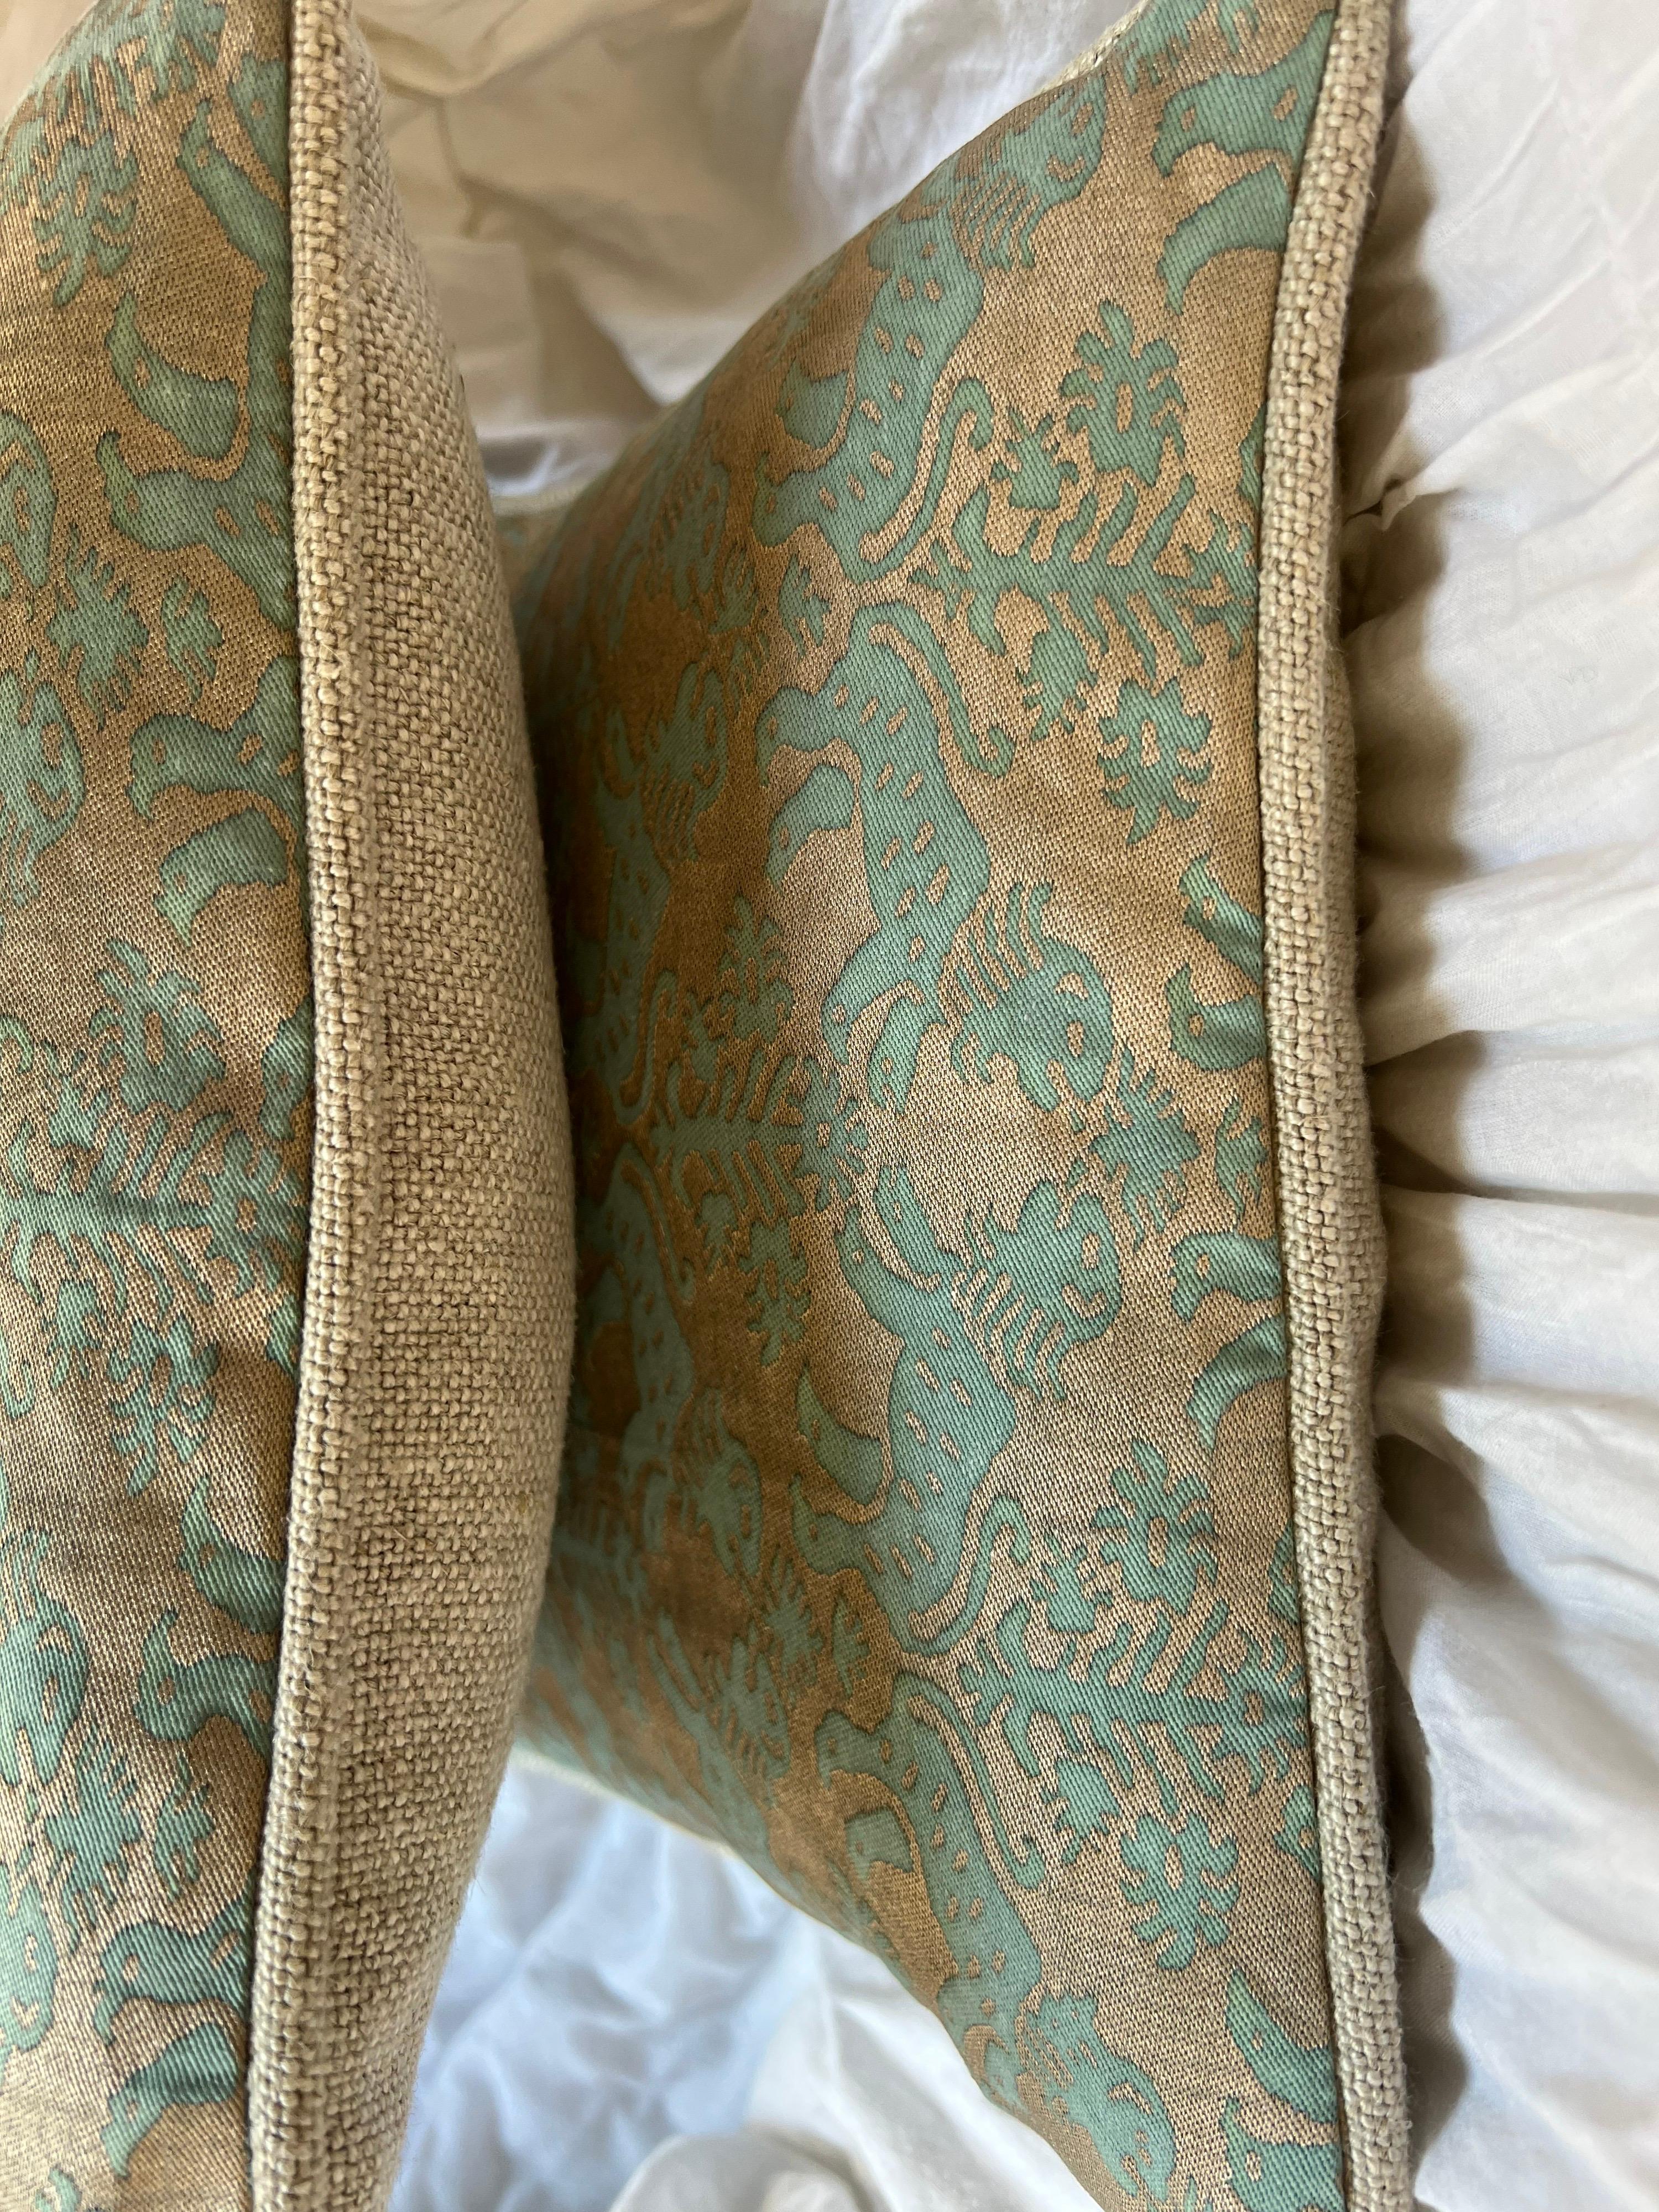 Baroque Pair of Richeleau Patterned Fortuny Pillows